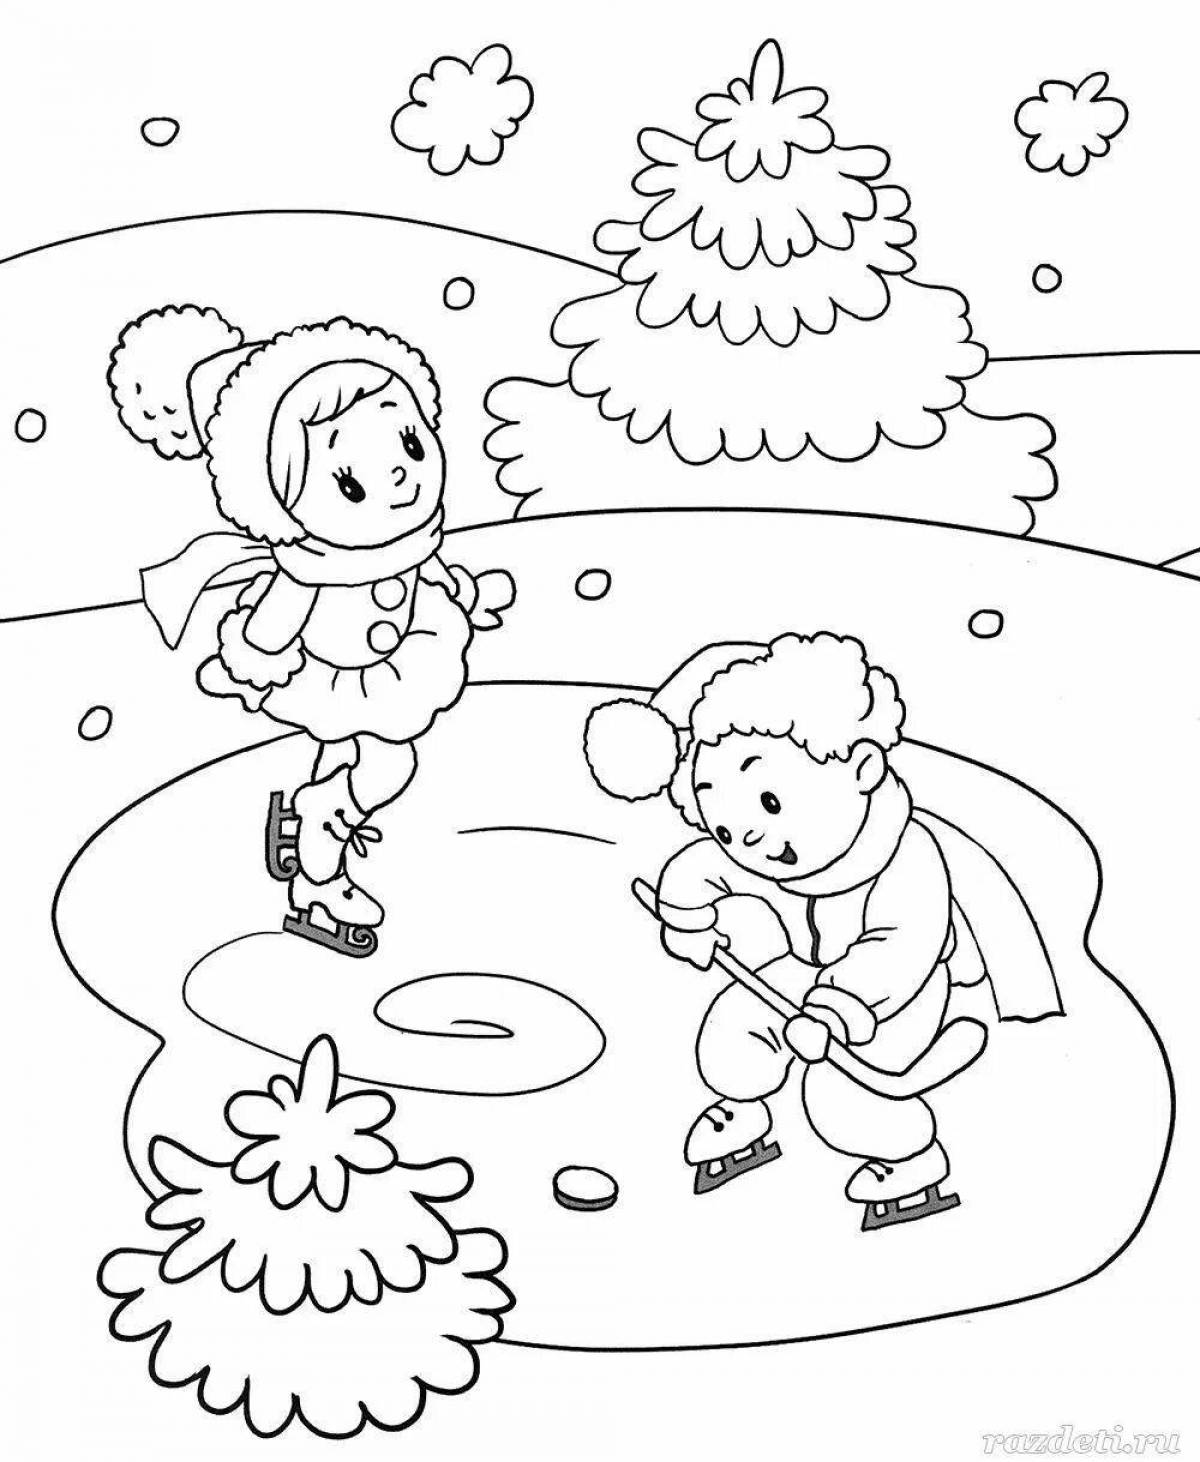 Christmas funny coloring book